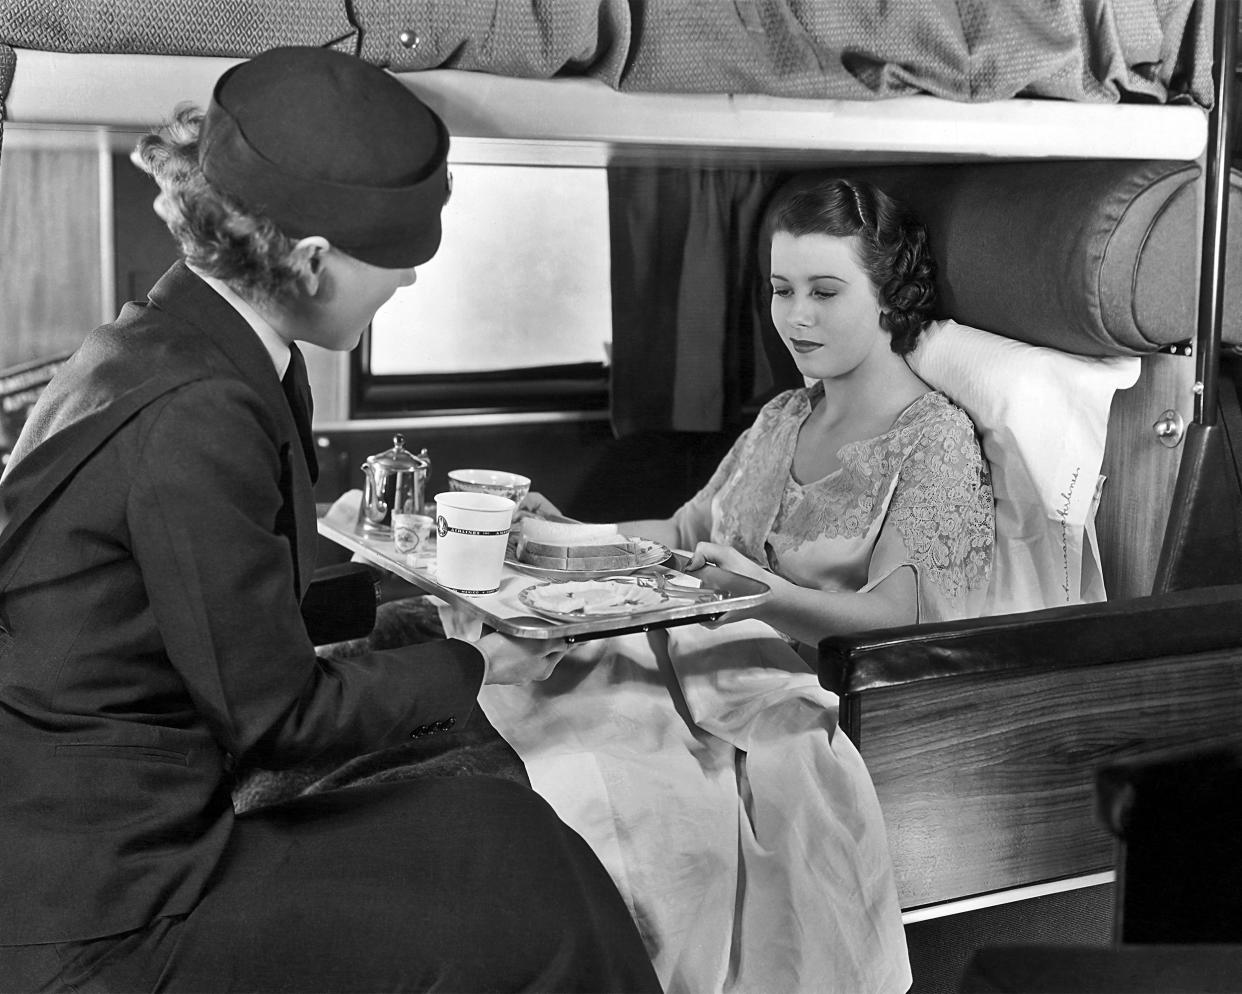 A flight attendant serves coffee and sandwiches to a passenger on board an American Airlines flight